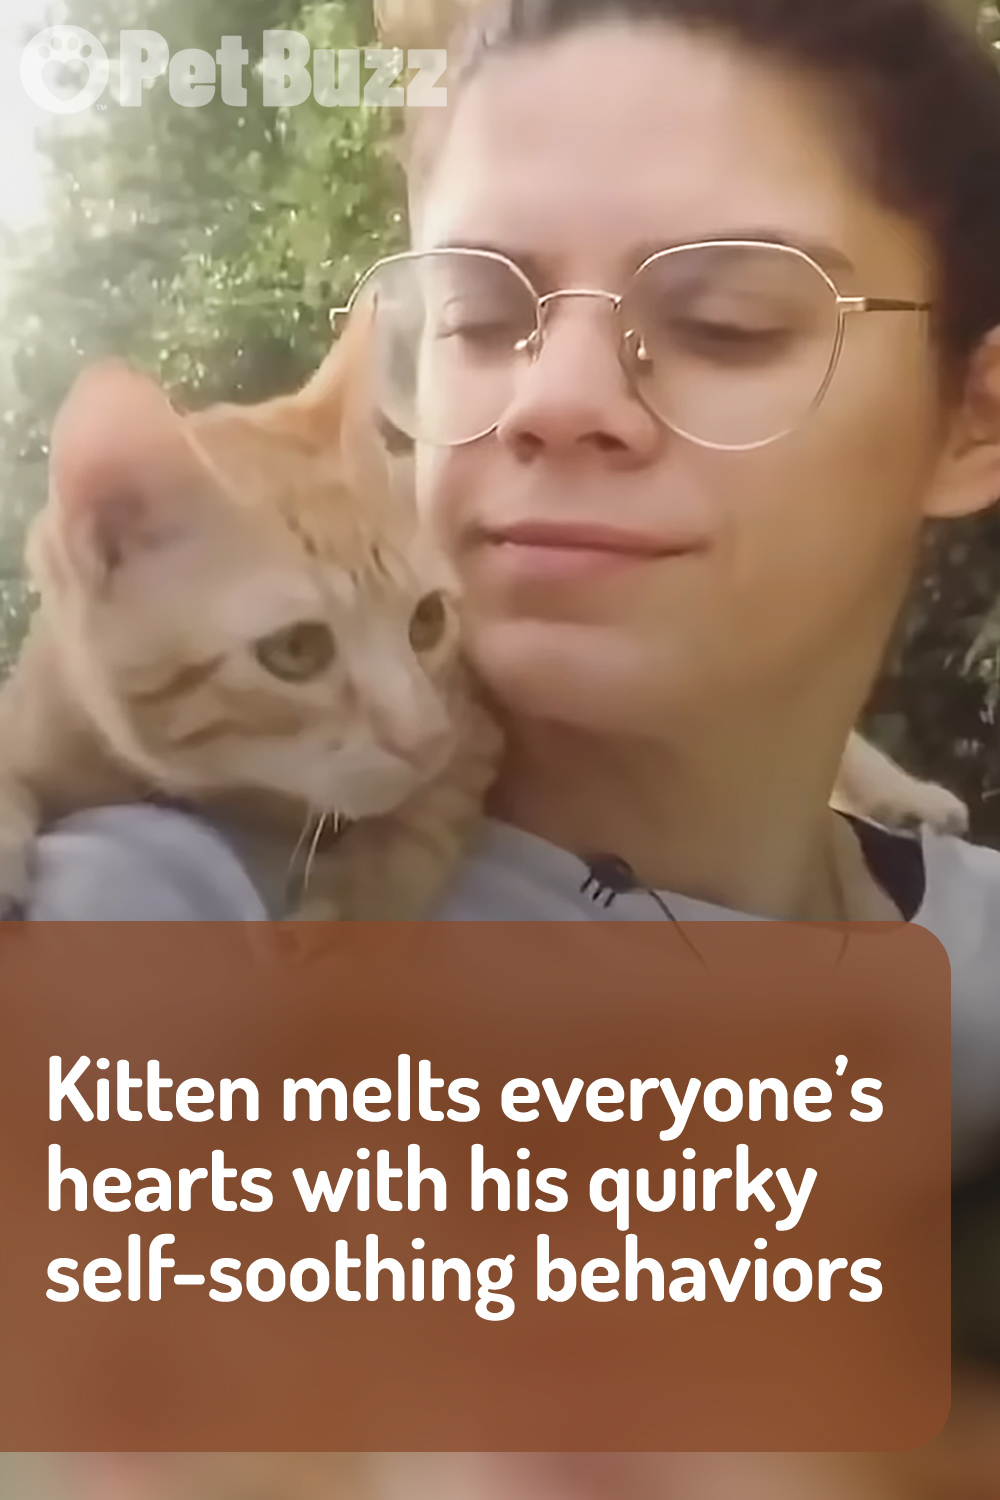 Kitten melts everyone’s hearts with his quirky self-soothing behaviors